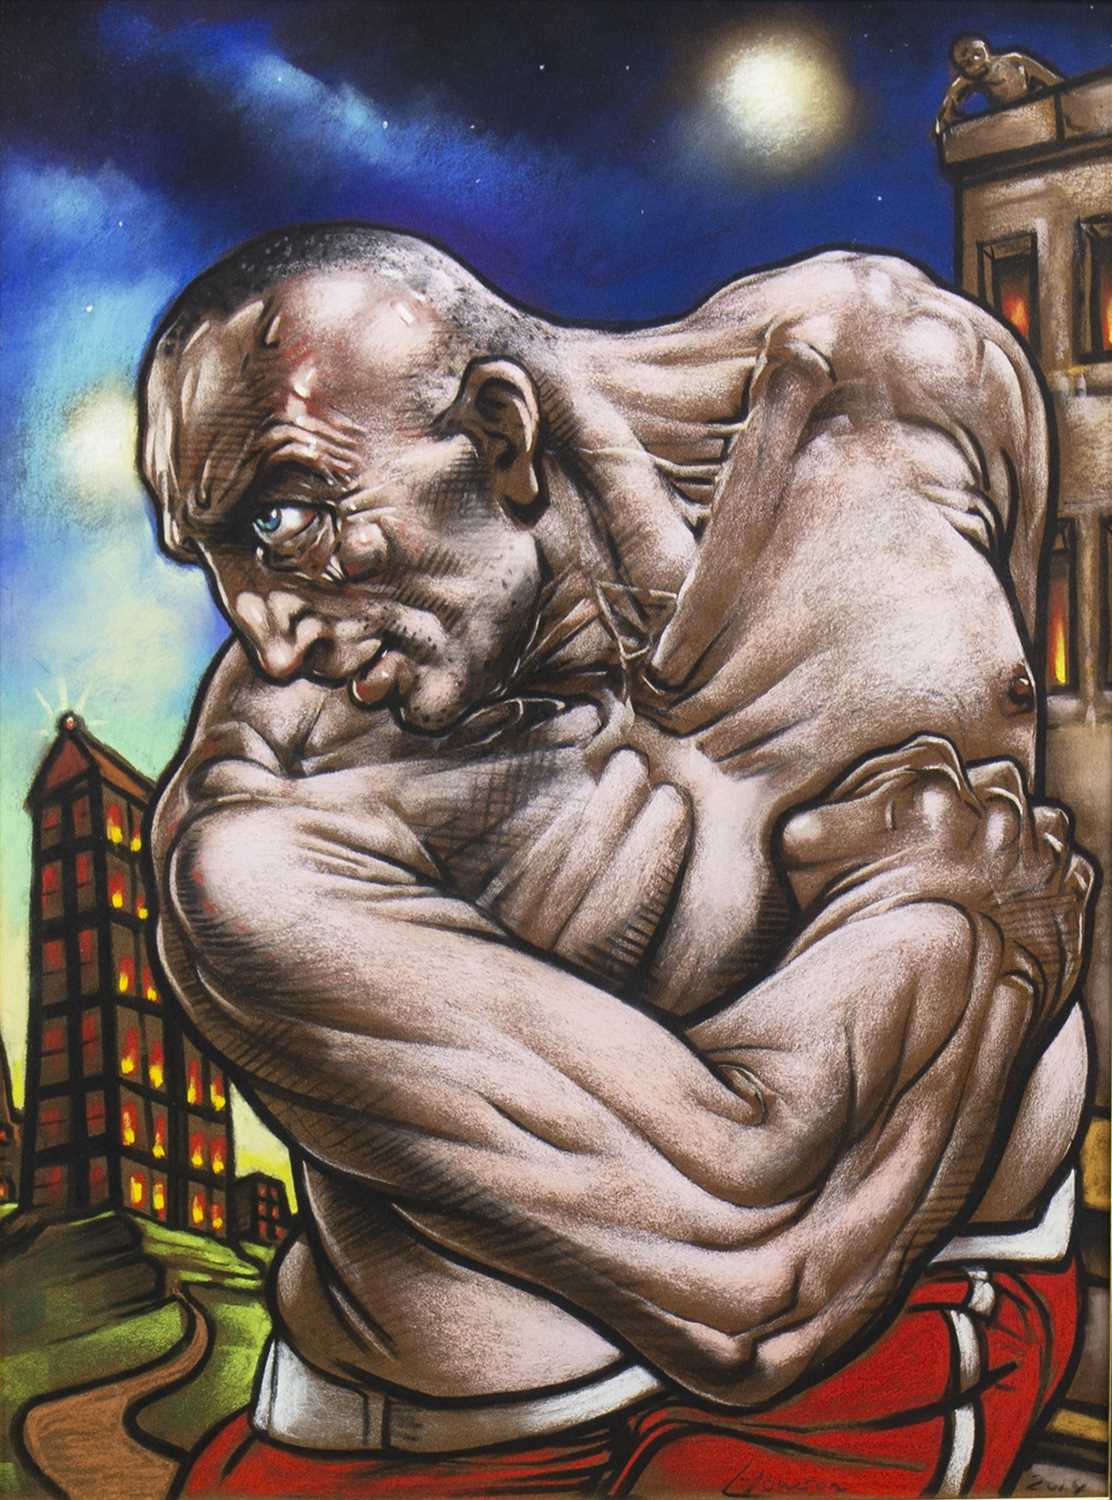 Lot 573 - GALLOWGATE GLADIATOR, A PASTEL BY PETER HOWSON